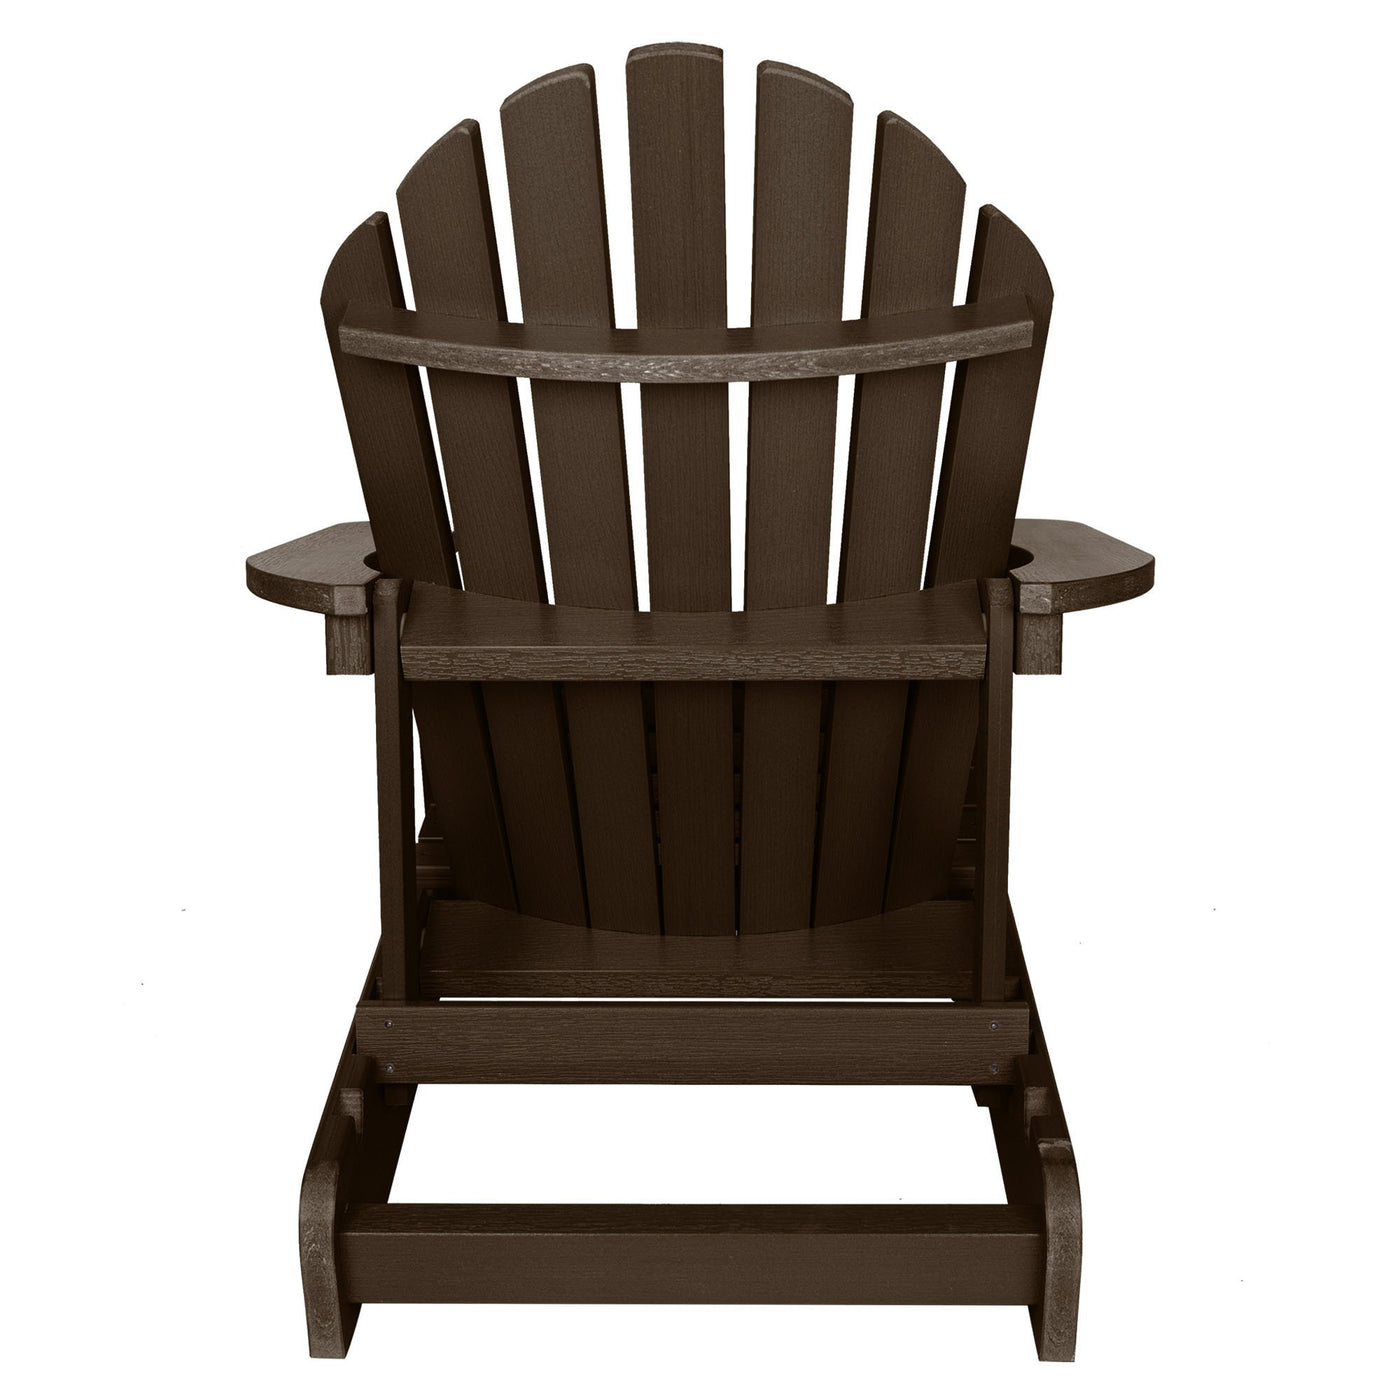 Back view of Hamilton Adirondack chair in Weathered Acorn brown